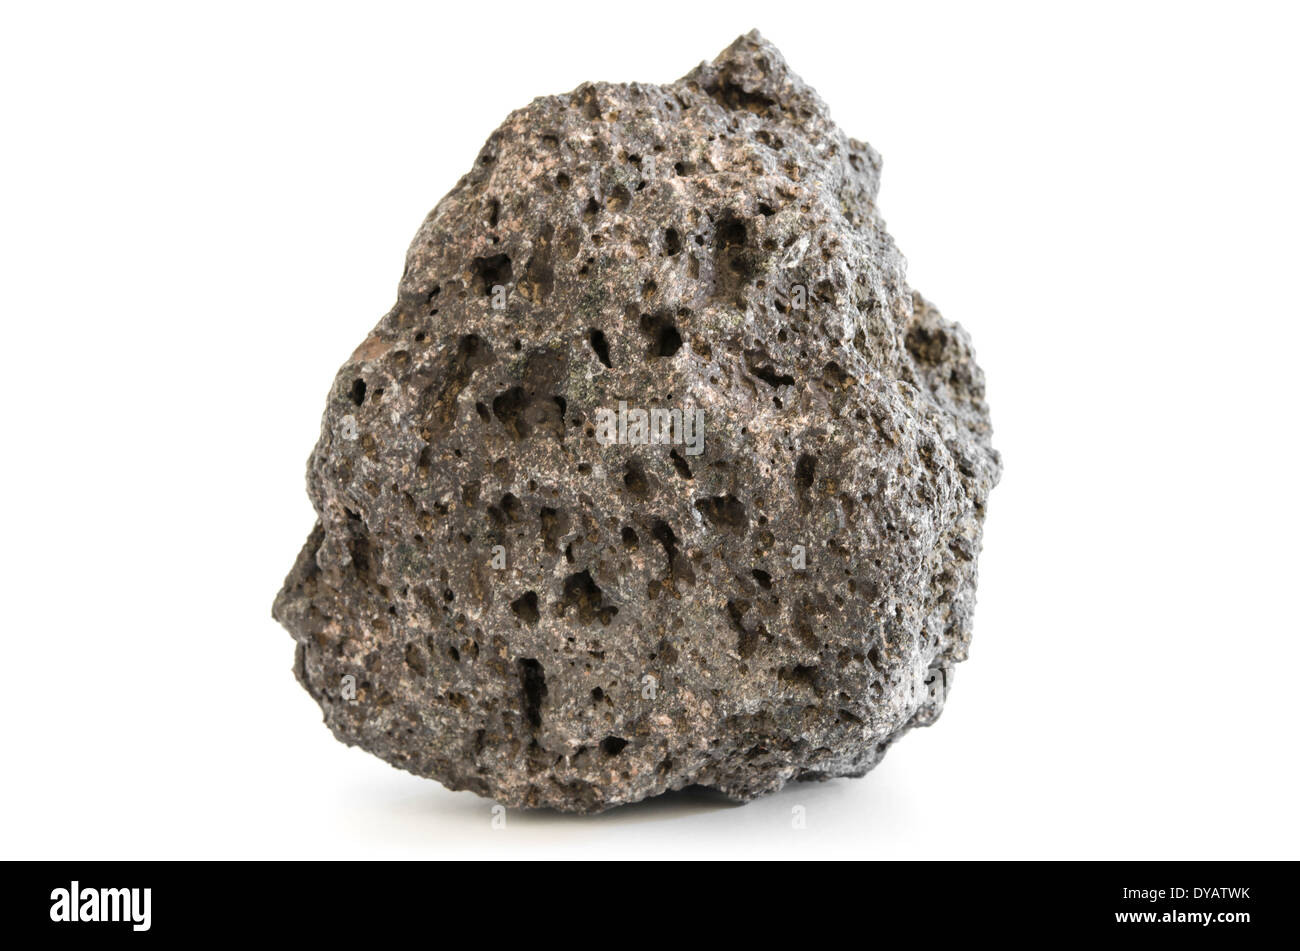 Pumice rough textured volcanic mineral isolated on white with shadow Stock Photo